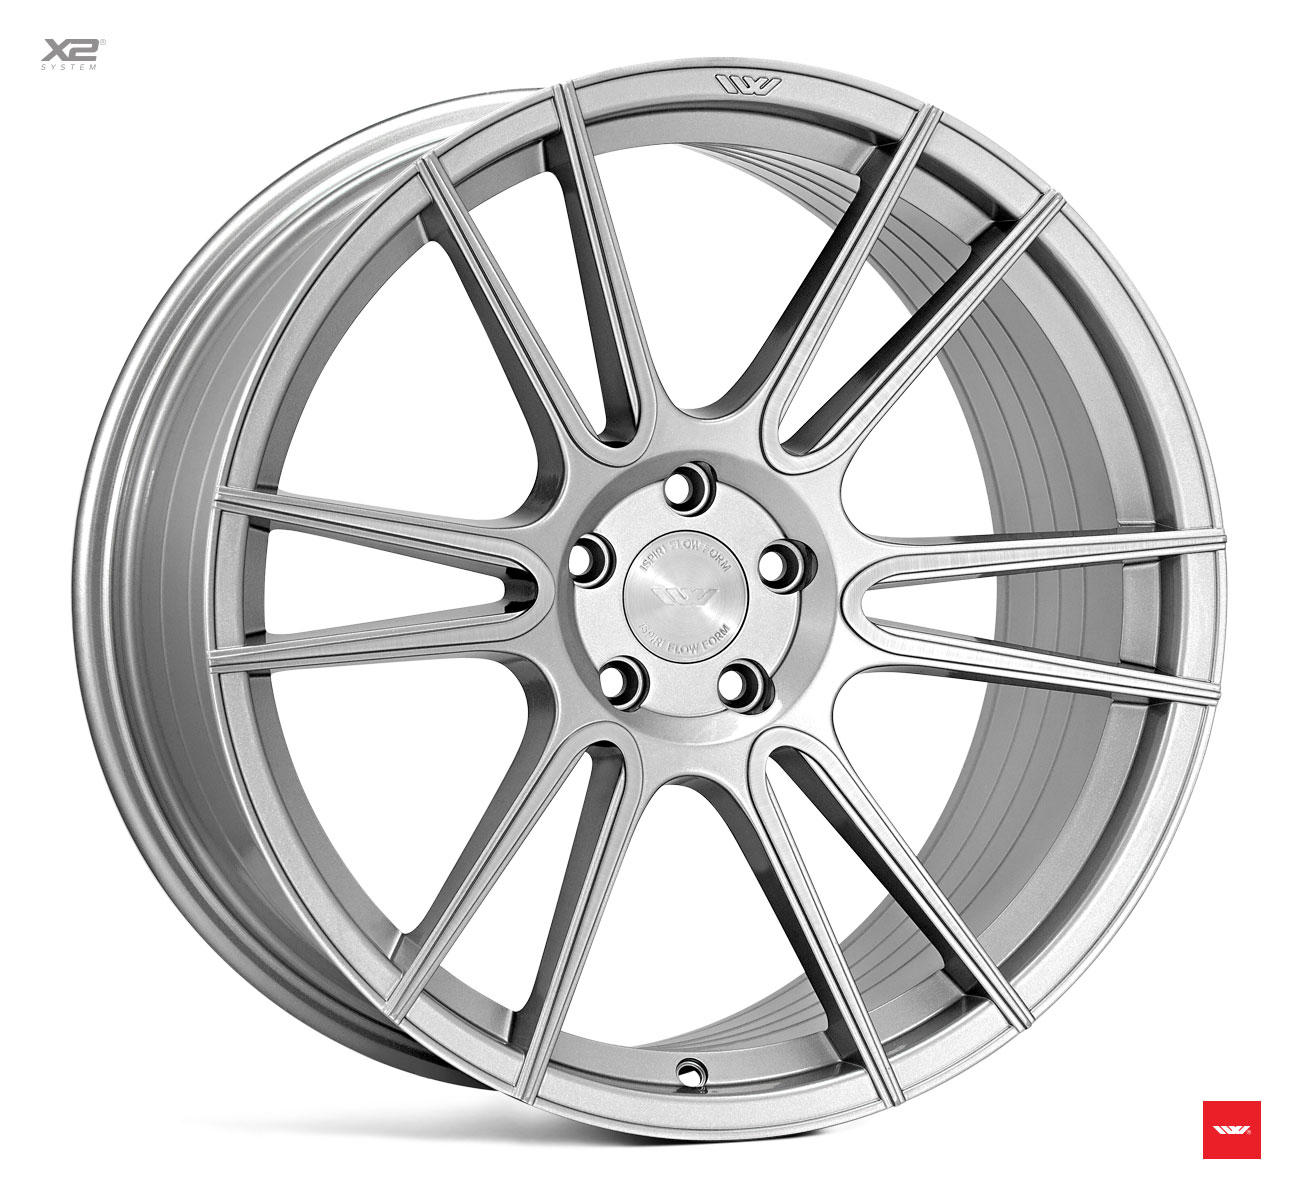 NEW 20" ISPIRI FFR7 TWIN CURVED 6 SPOKE ALLOY WHEELS IN PURE SILVER BRUSHED, WIDER 10" REAR 5x120